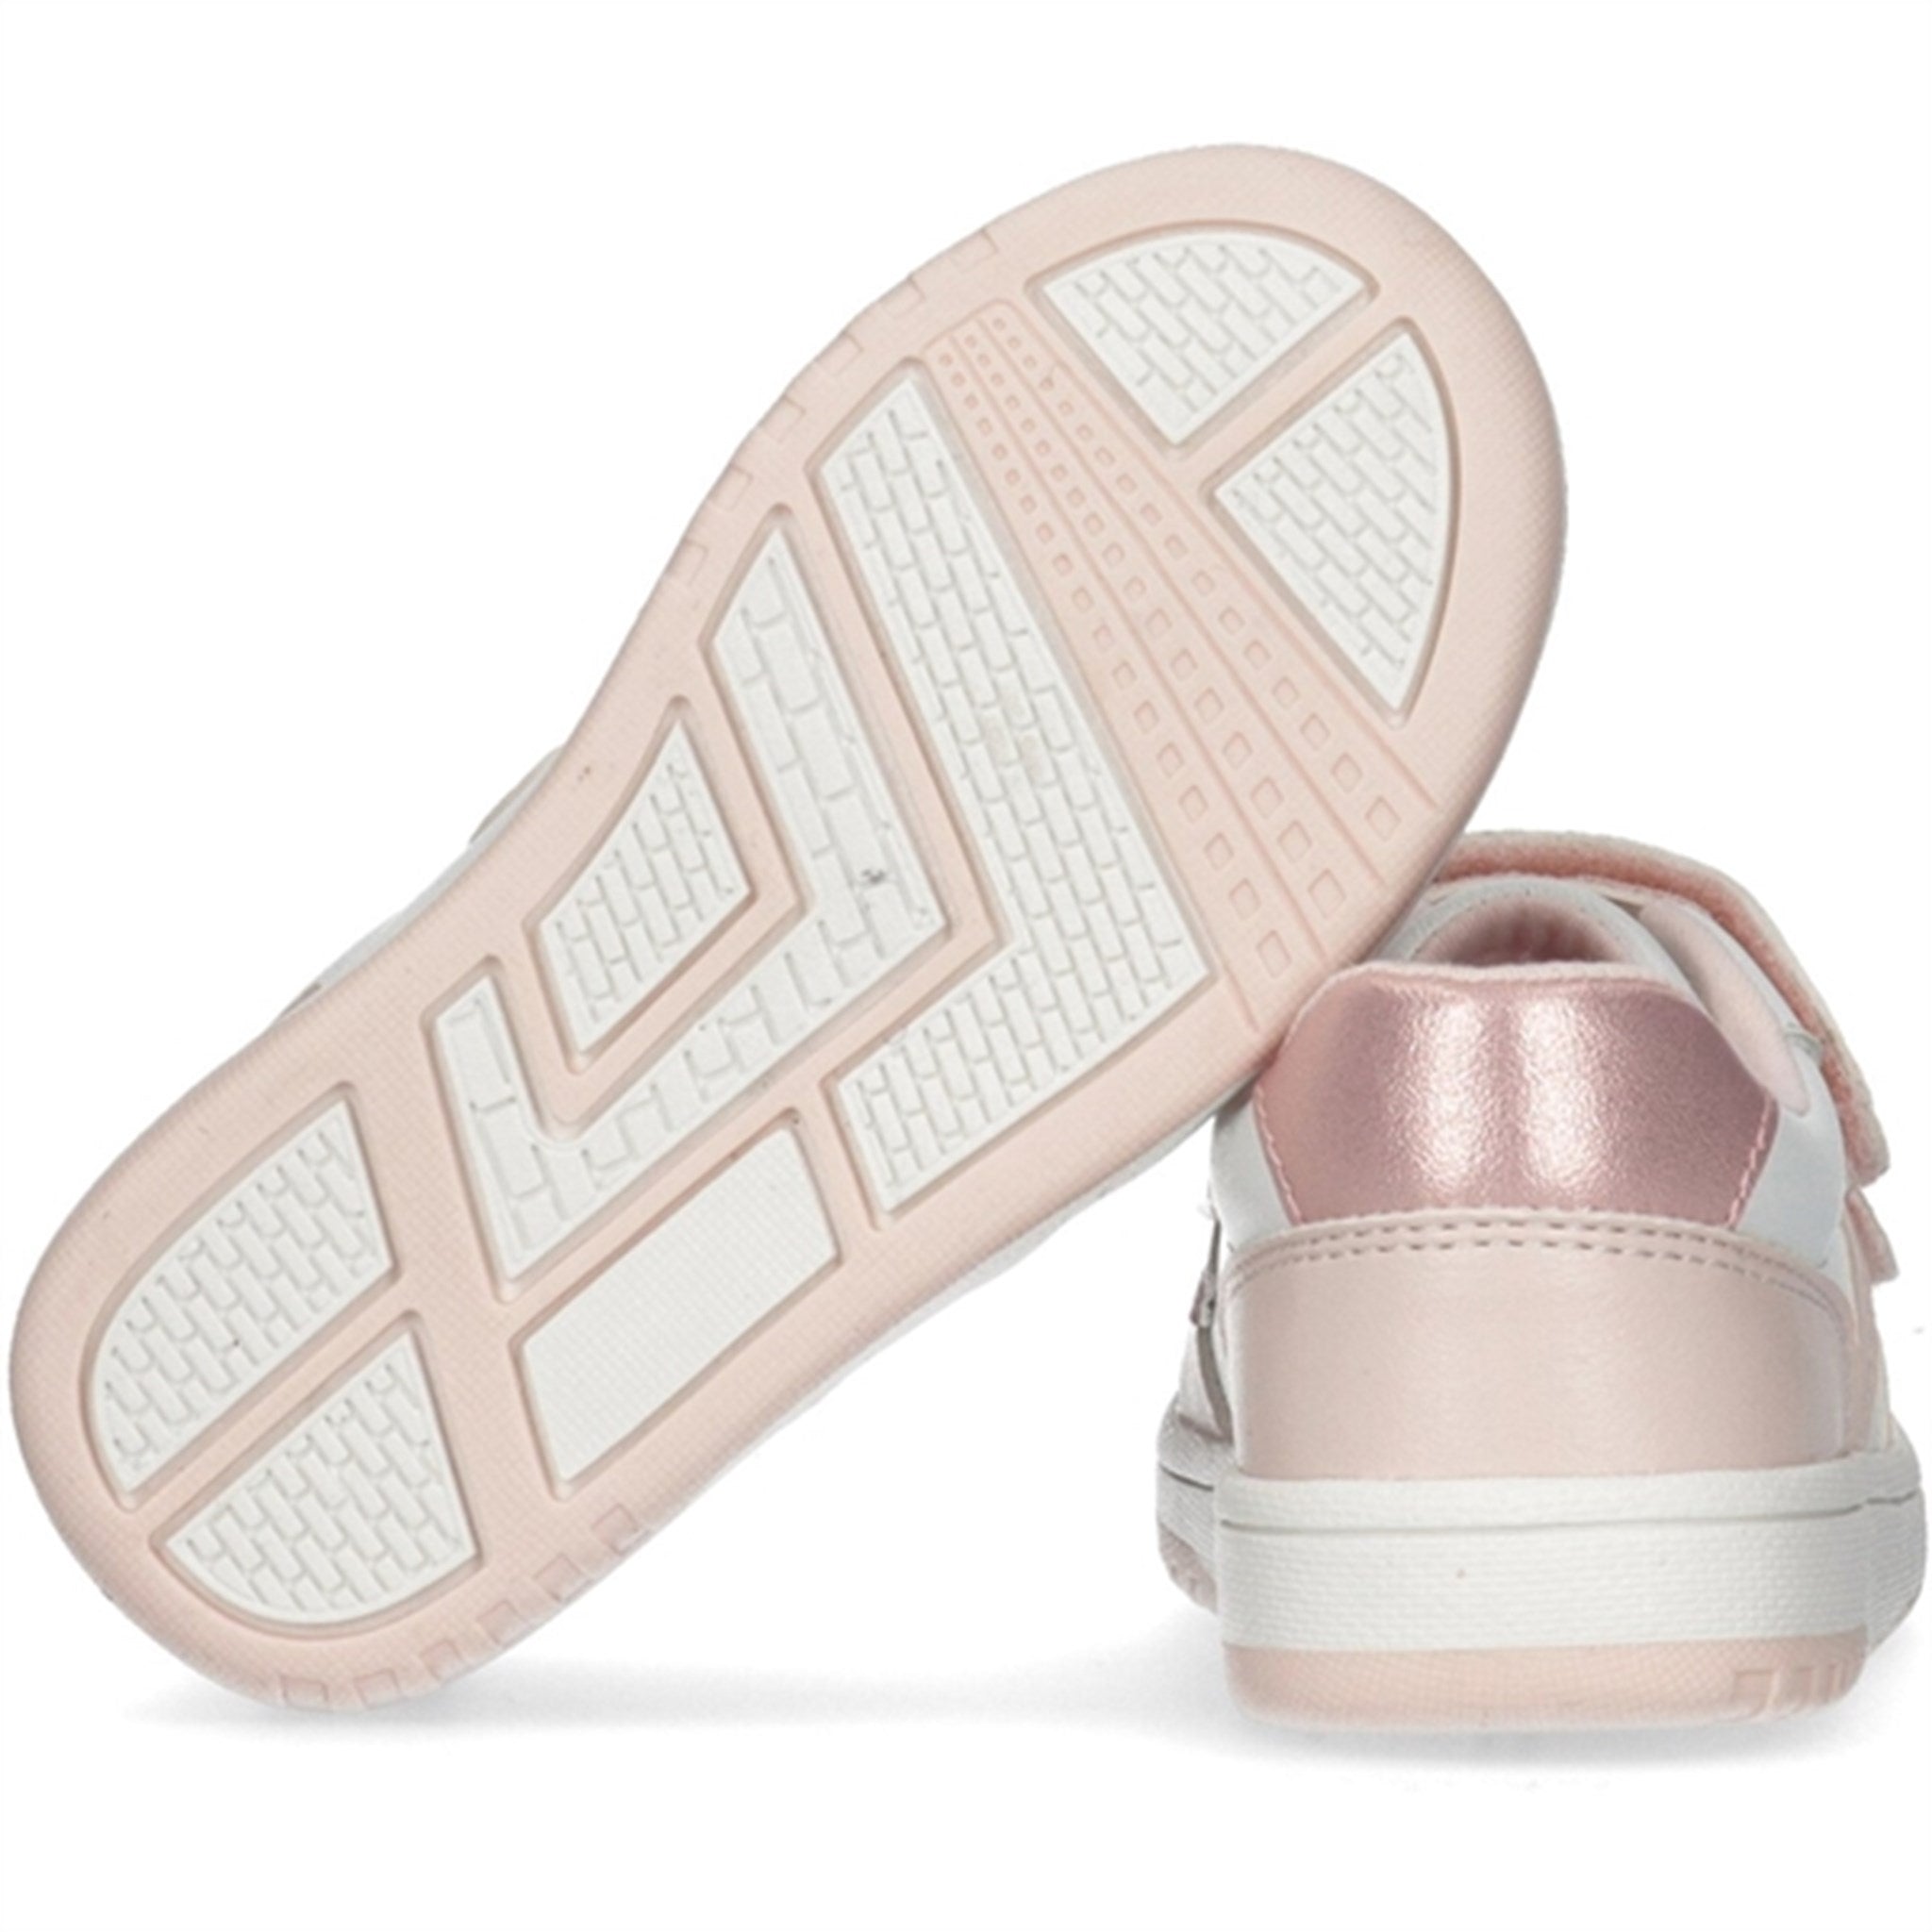 Tommy Hilfiger Low Cut Velcro Sneakers Pink/White 5